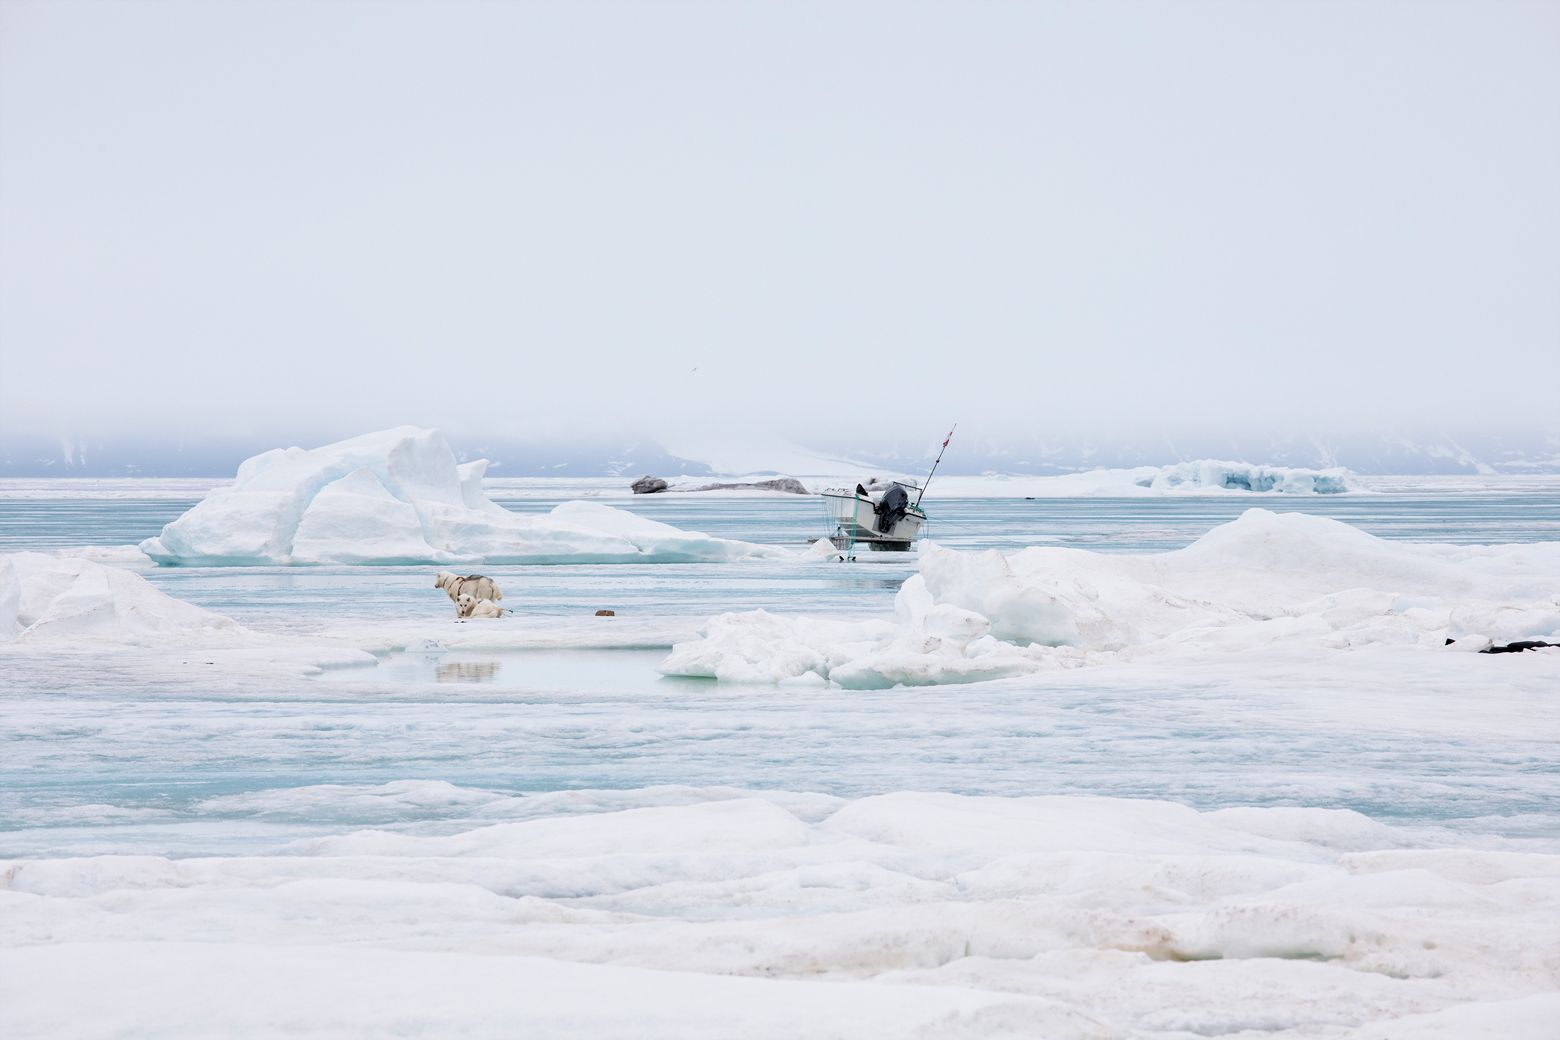 As well as for hunting, Qaanaaq’s residents must brave the sea ice to get potable water. During the summer months, they get their water from a nearby river. But during winter it is simply too cold for the river to flow. Instead, they collect icebergs, bringing them to a special facility where the ice is melted and distributed to all of Qaanaaq’s houses by a water tanker.

This means that even the simple task of collecting fresh water has become more dangerous. Image by Anna Filipova. Greenland, 2018.